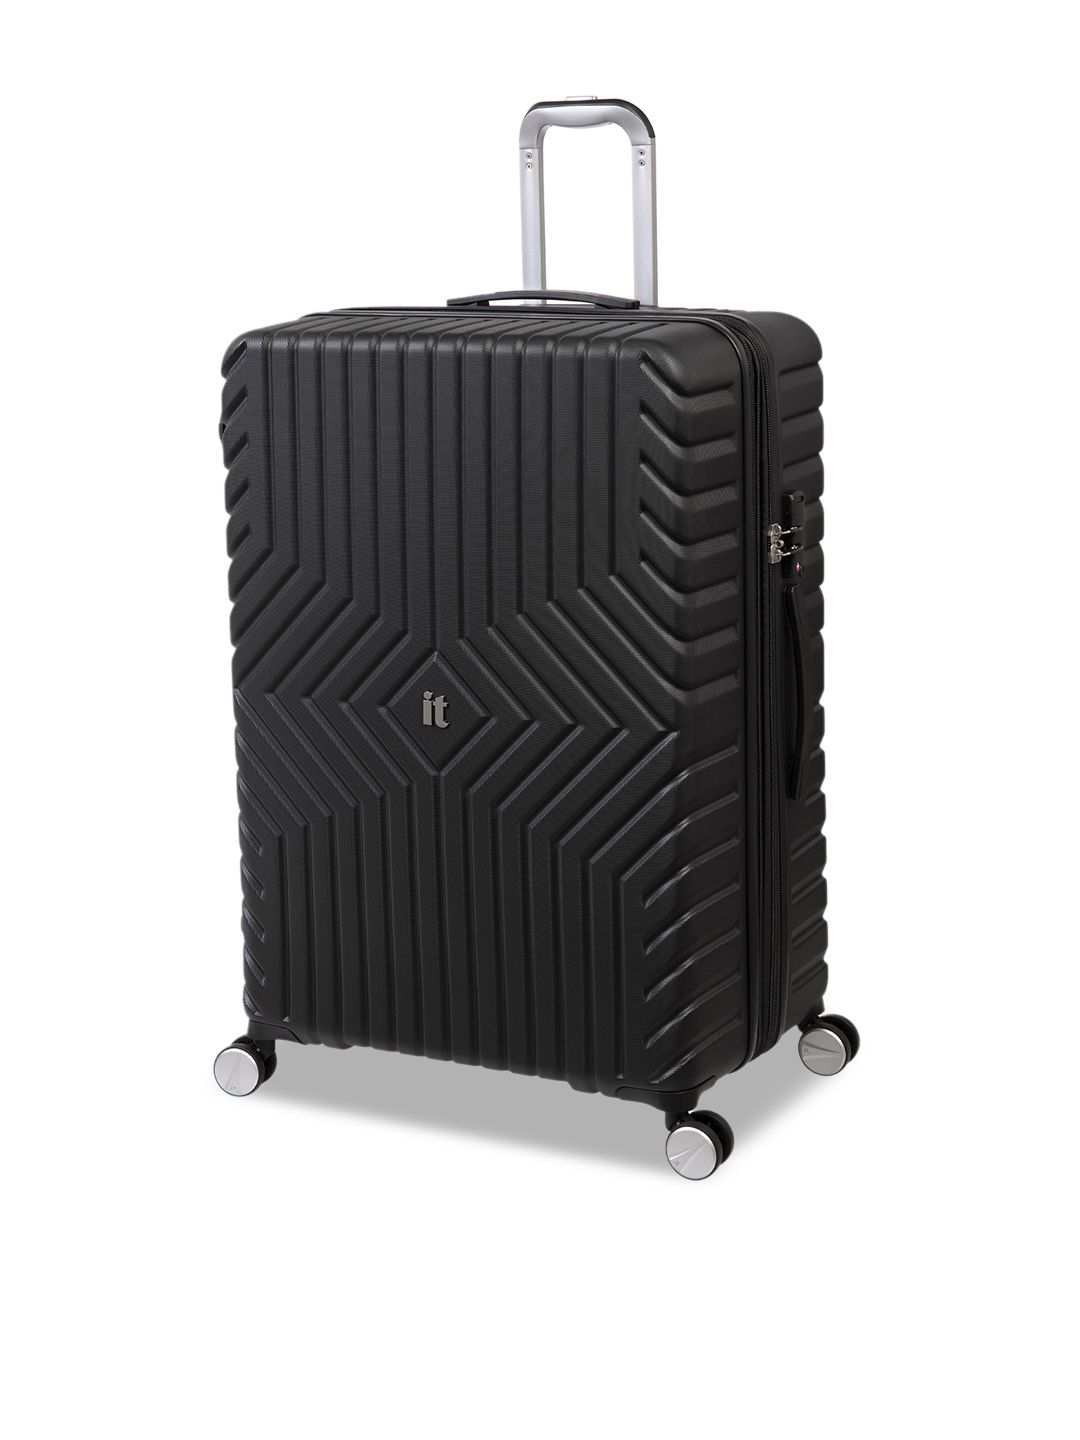 IT luggage Black Textured Hard-Sided Trolley Suitcase Price in India